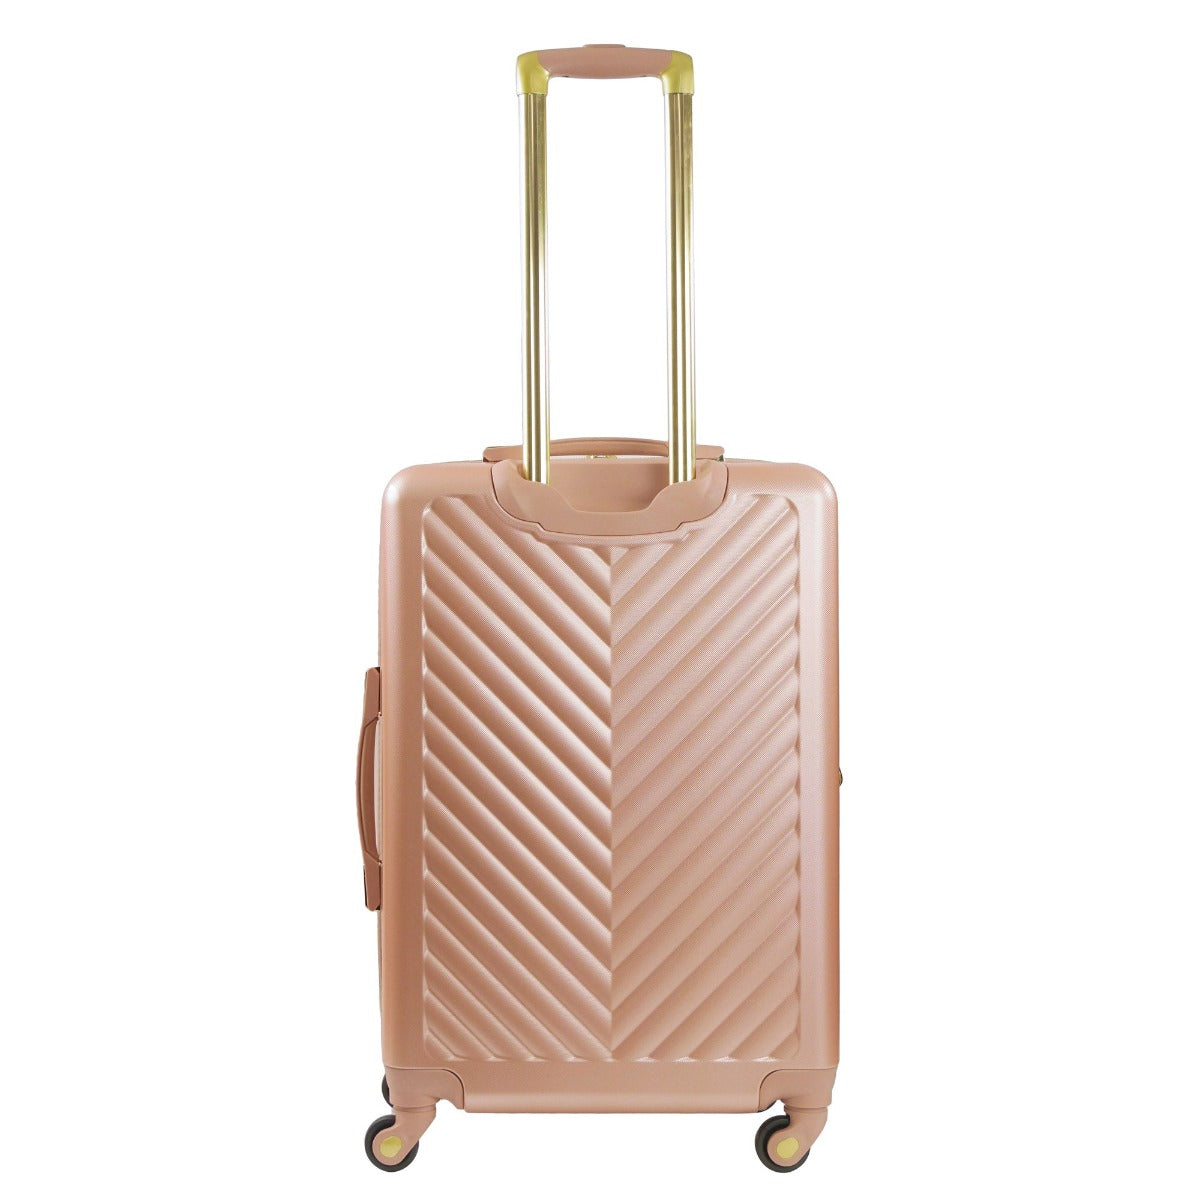 Christian Siriano Addie 25" checked luggage hardside spinner rose gold - best suitcase for travelling